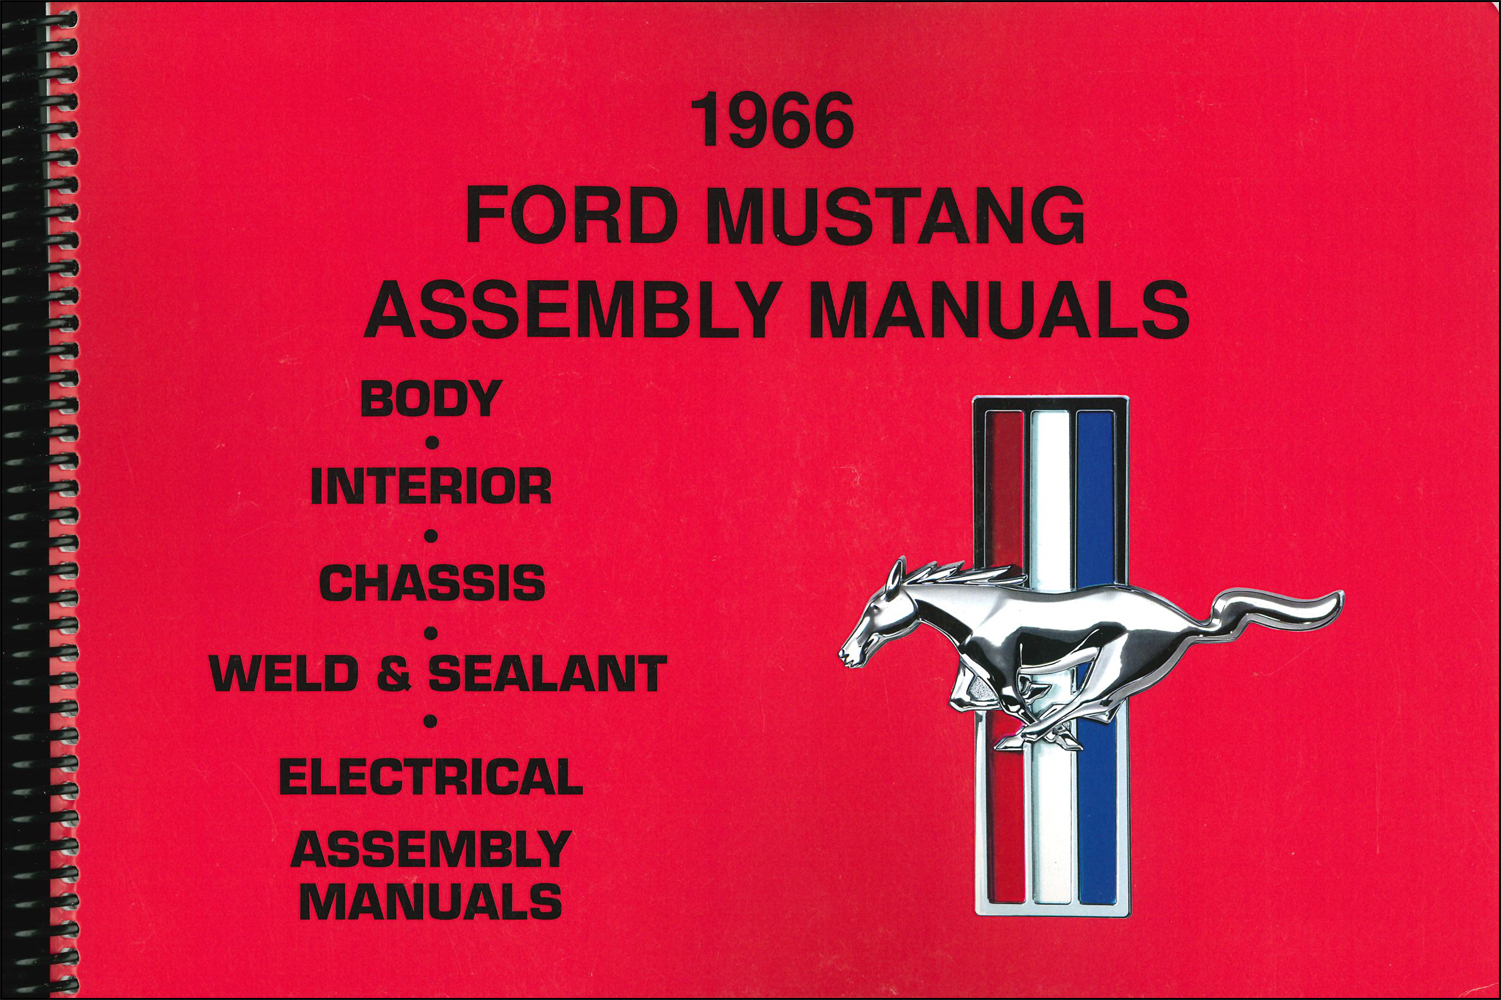 1966 Ford Mustang Assembly Manual Reprint set of 5 Books in 1 Volume